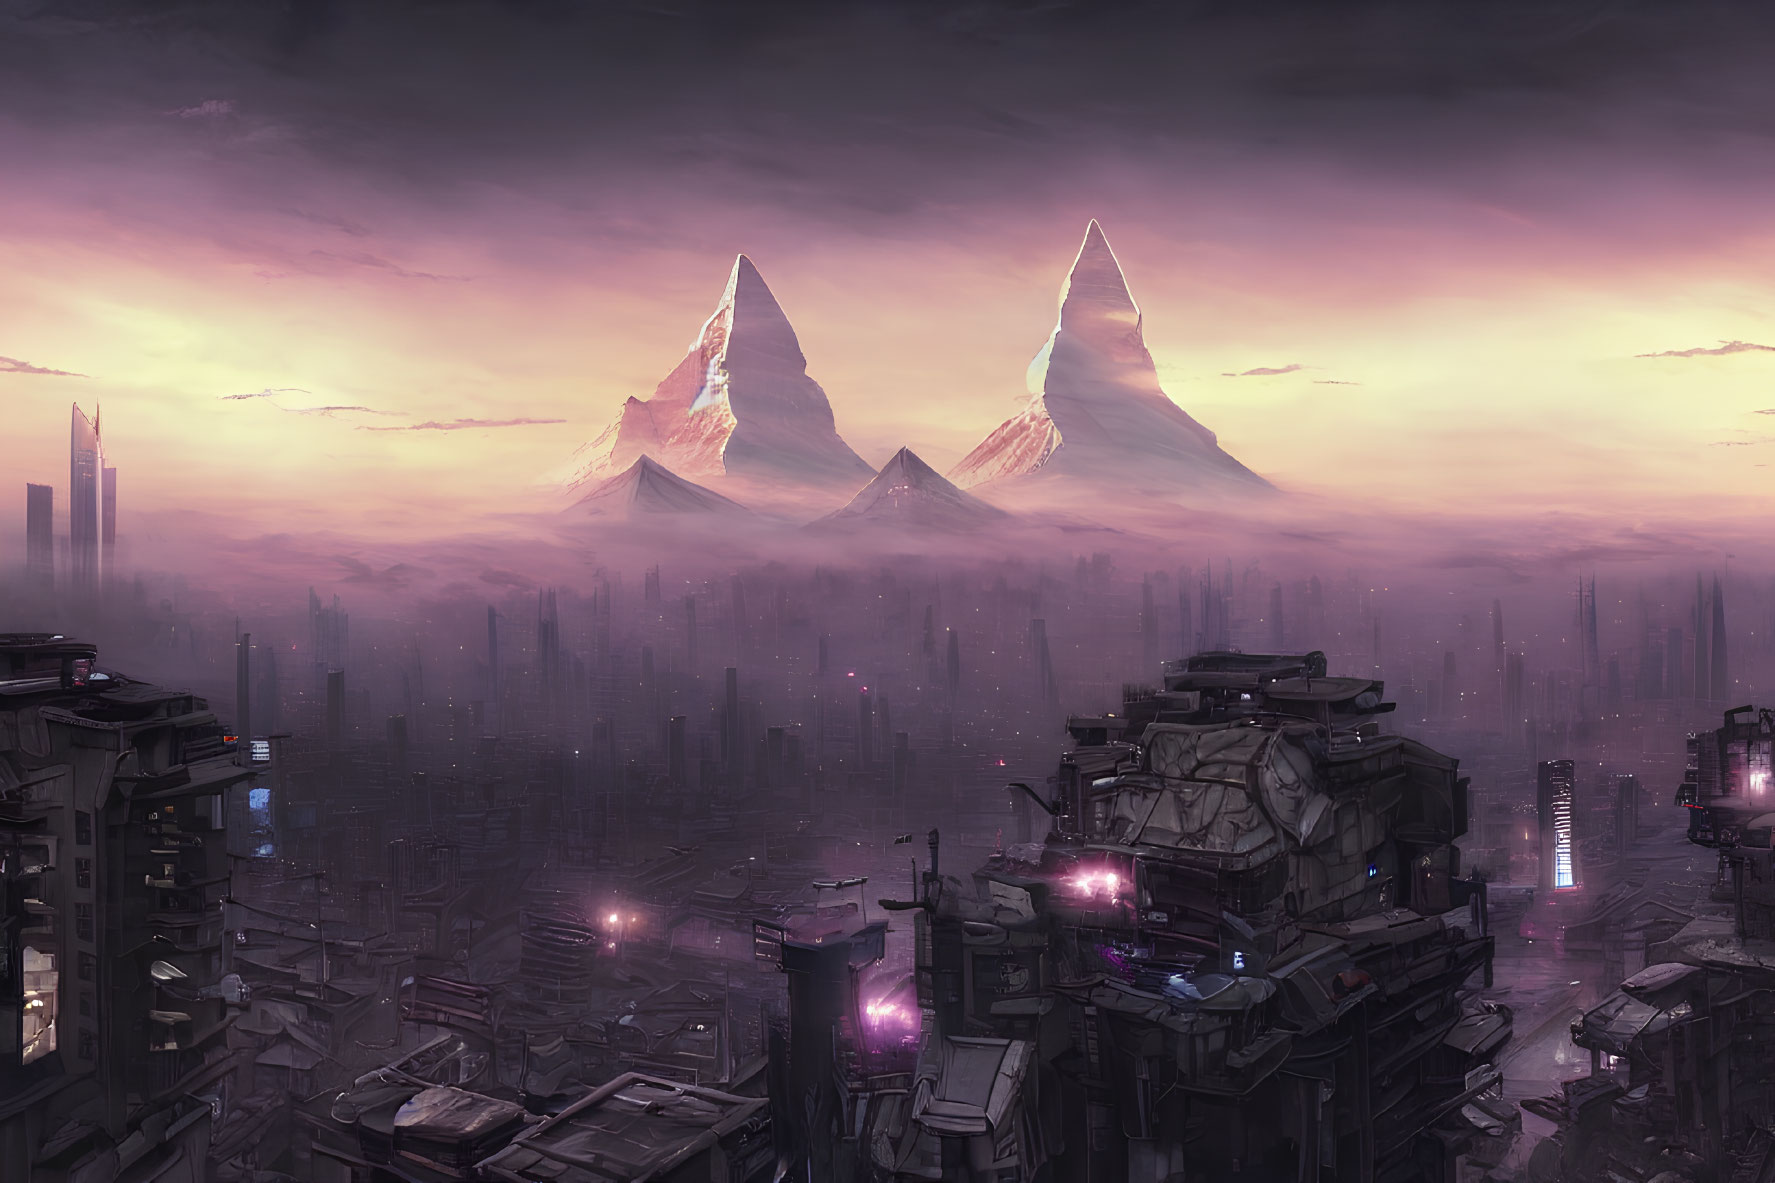 Futuristic cityscape at dusk with high-rises, neon lights, and mountains under a purple